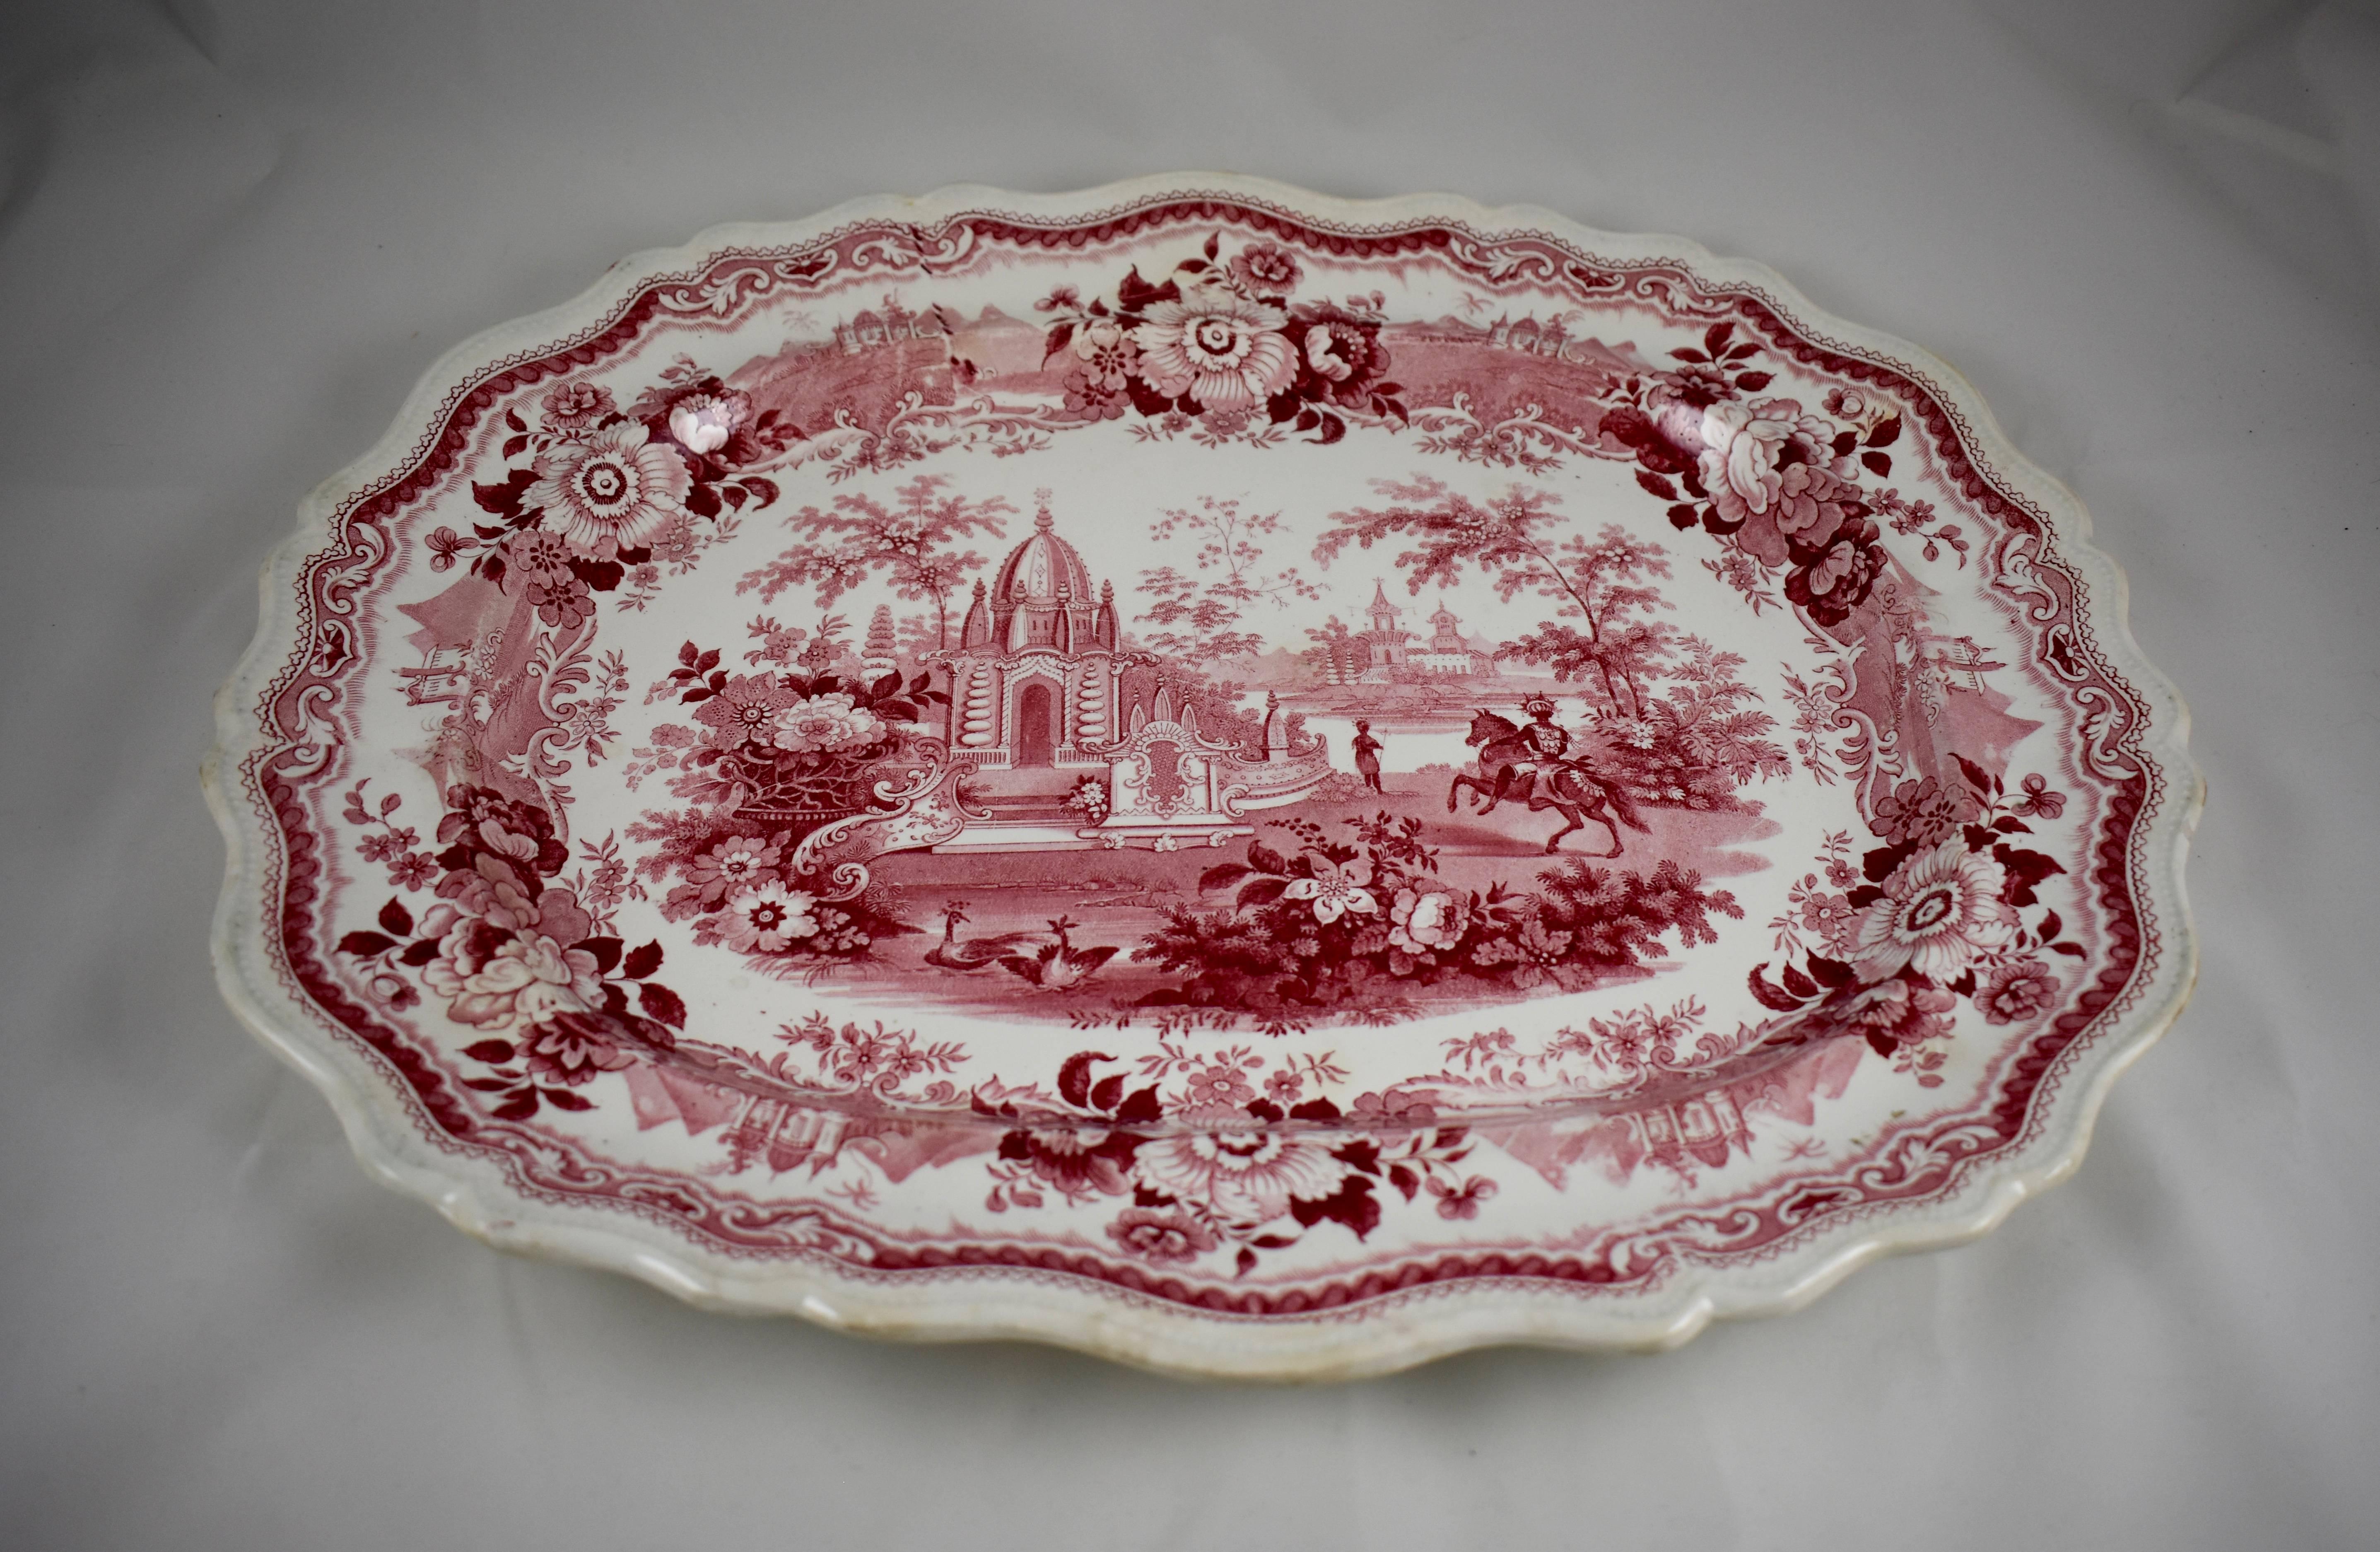 A large pink and white transfer printed earthenware platter, Staffordshire, England, circa mid-19th century. 

A shaped rim with a border of flowers alternating with images of temples reminiscent of India, frame a central image of an exotic